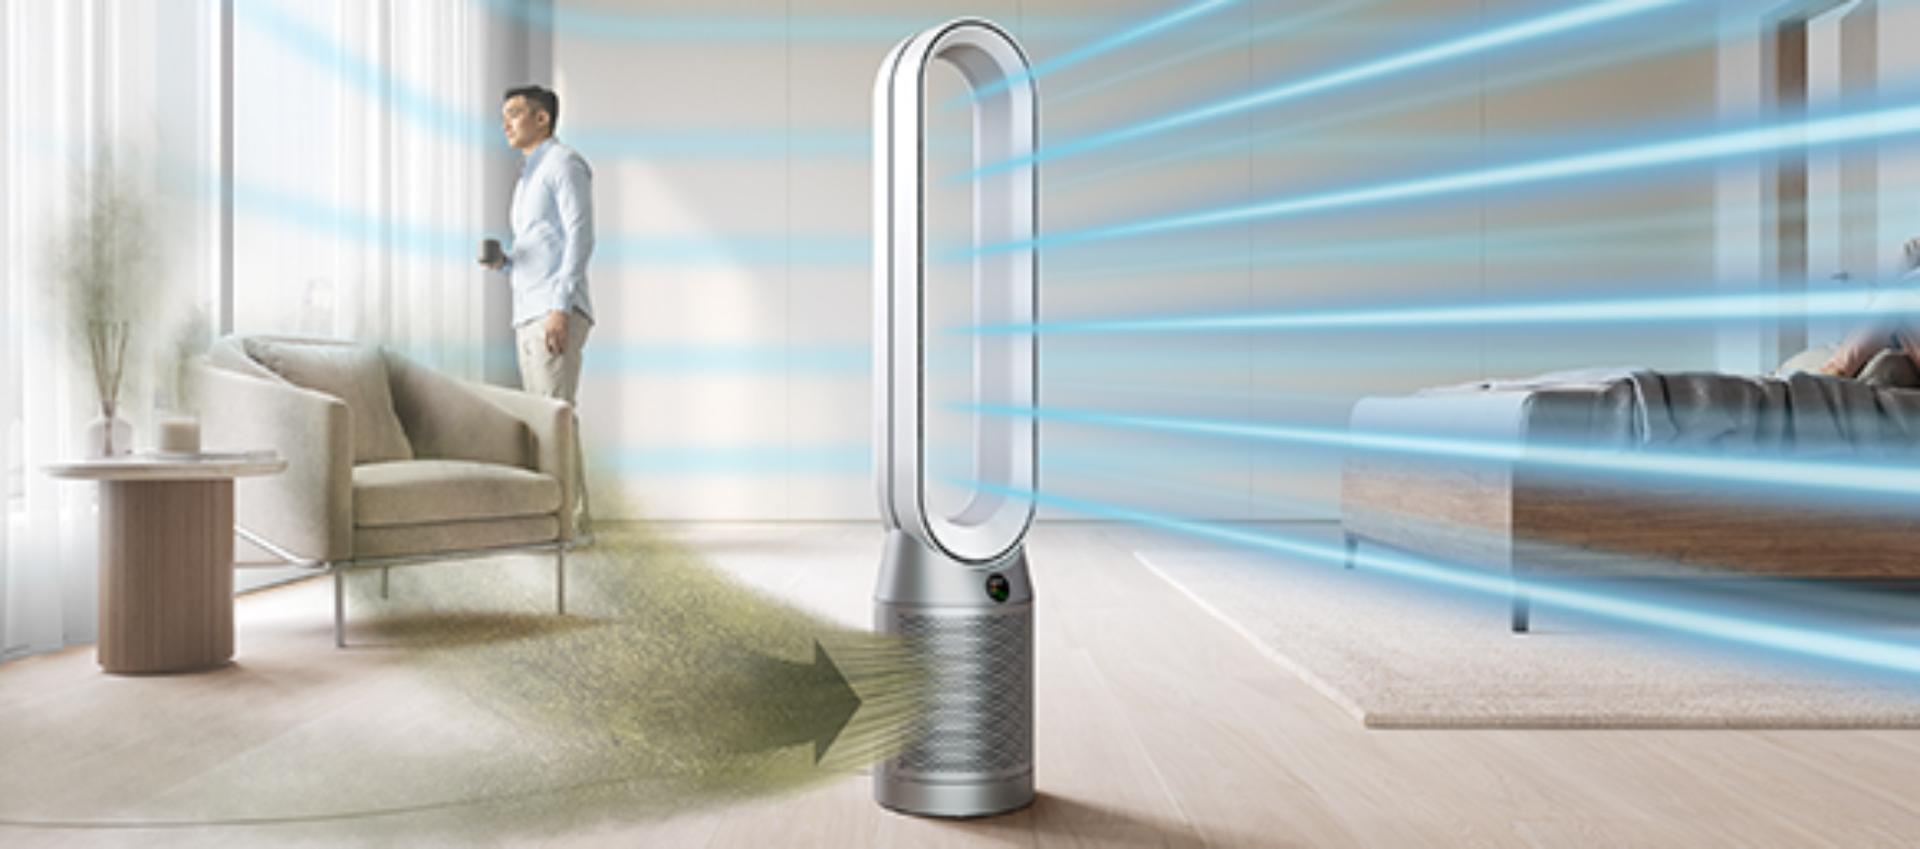 Air purifier in Use